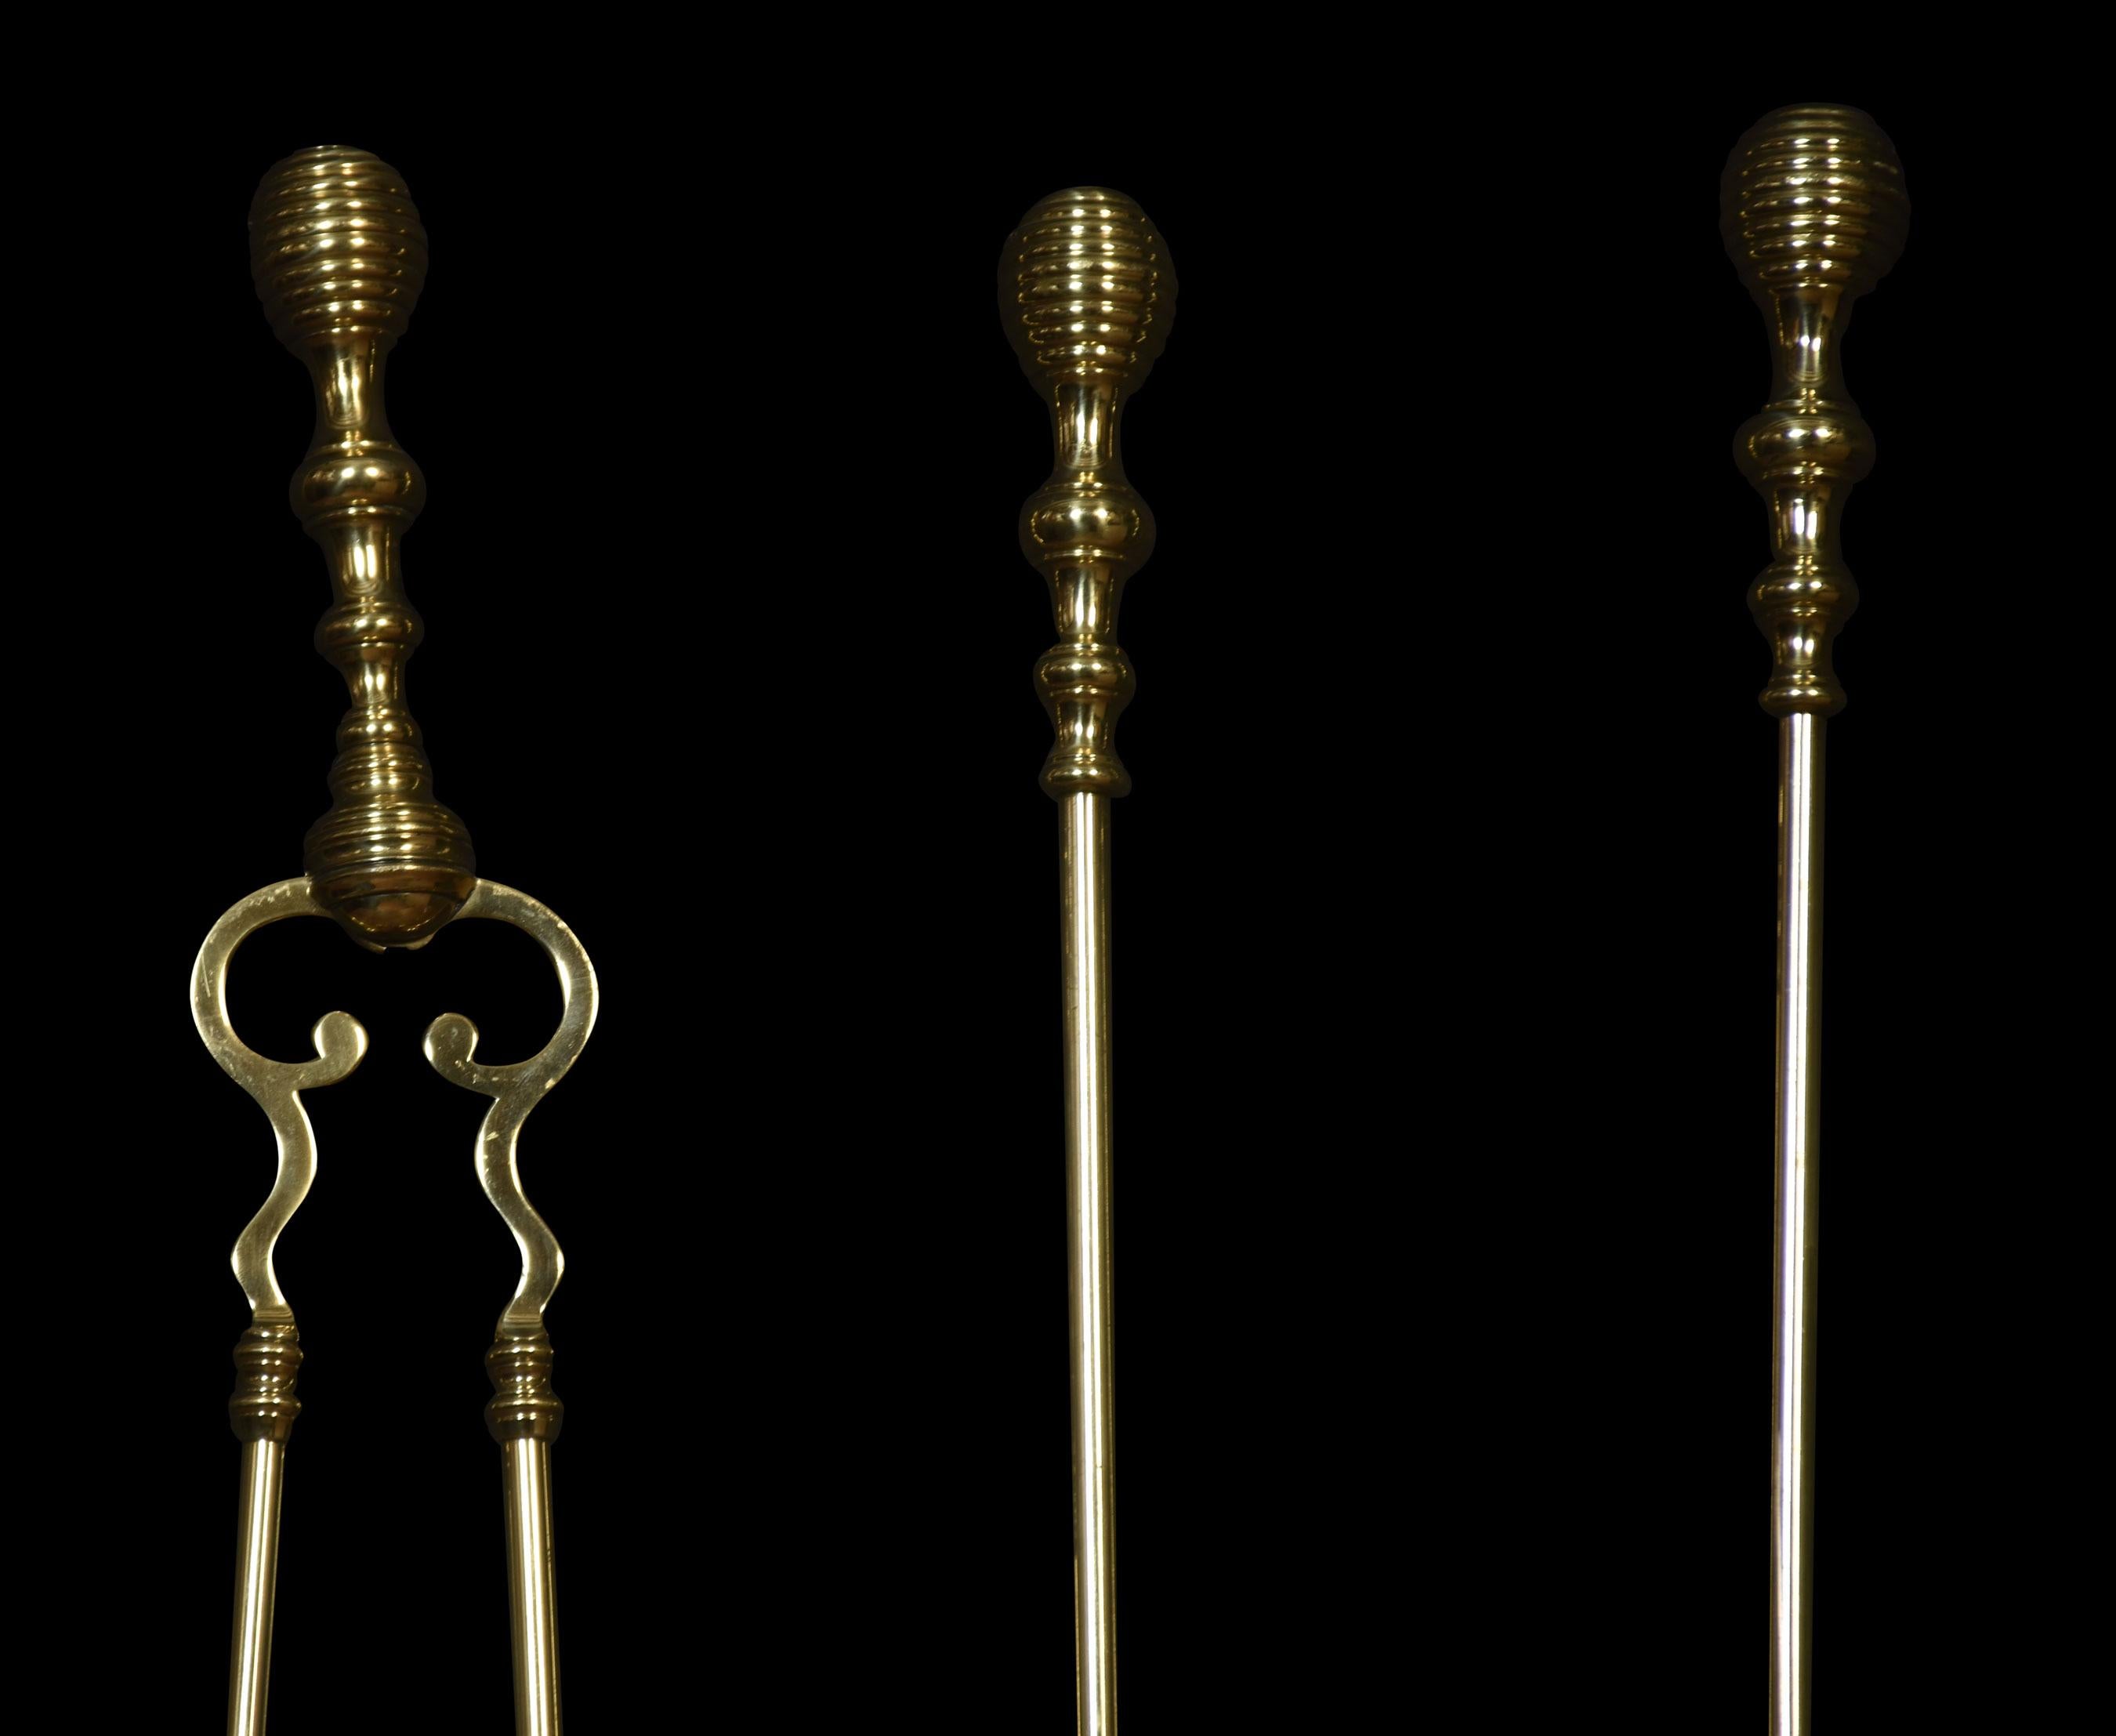 Set of three brass fire tools, consisting of poker, tongs and shovel with well-casted handles.
Dimensions
Height 23.5 Inches
Width 5 Inches
Depth 3 Inches.